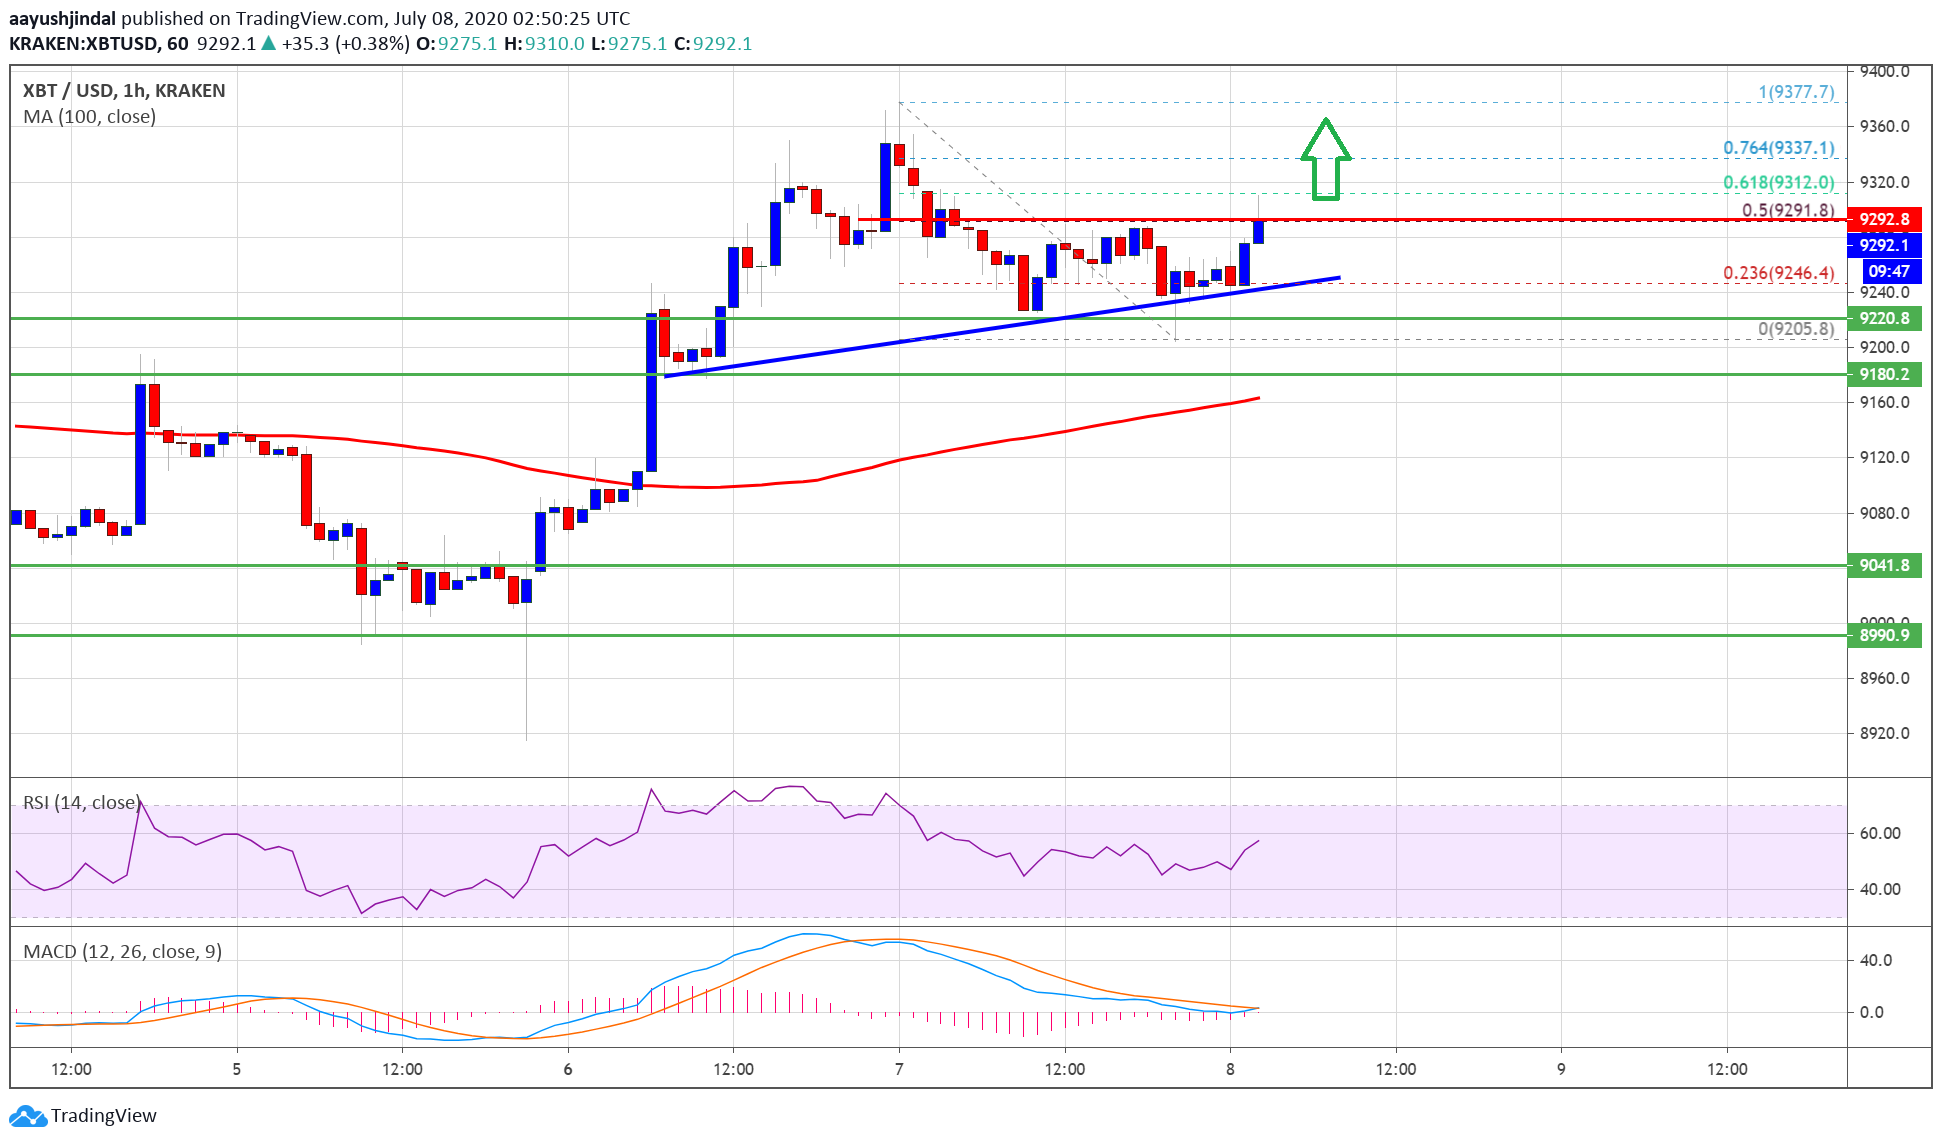 Technicals Suggest Bitcoin Likely To Target Fresh Monthly High Above $9,400